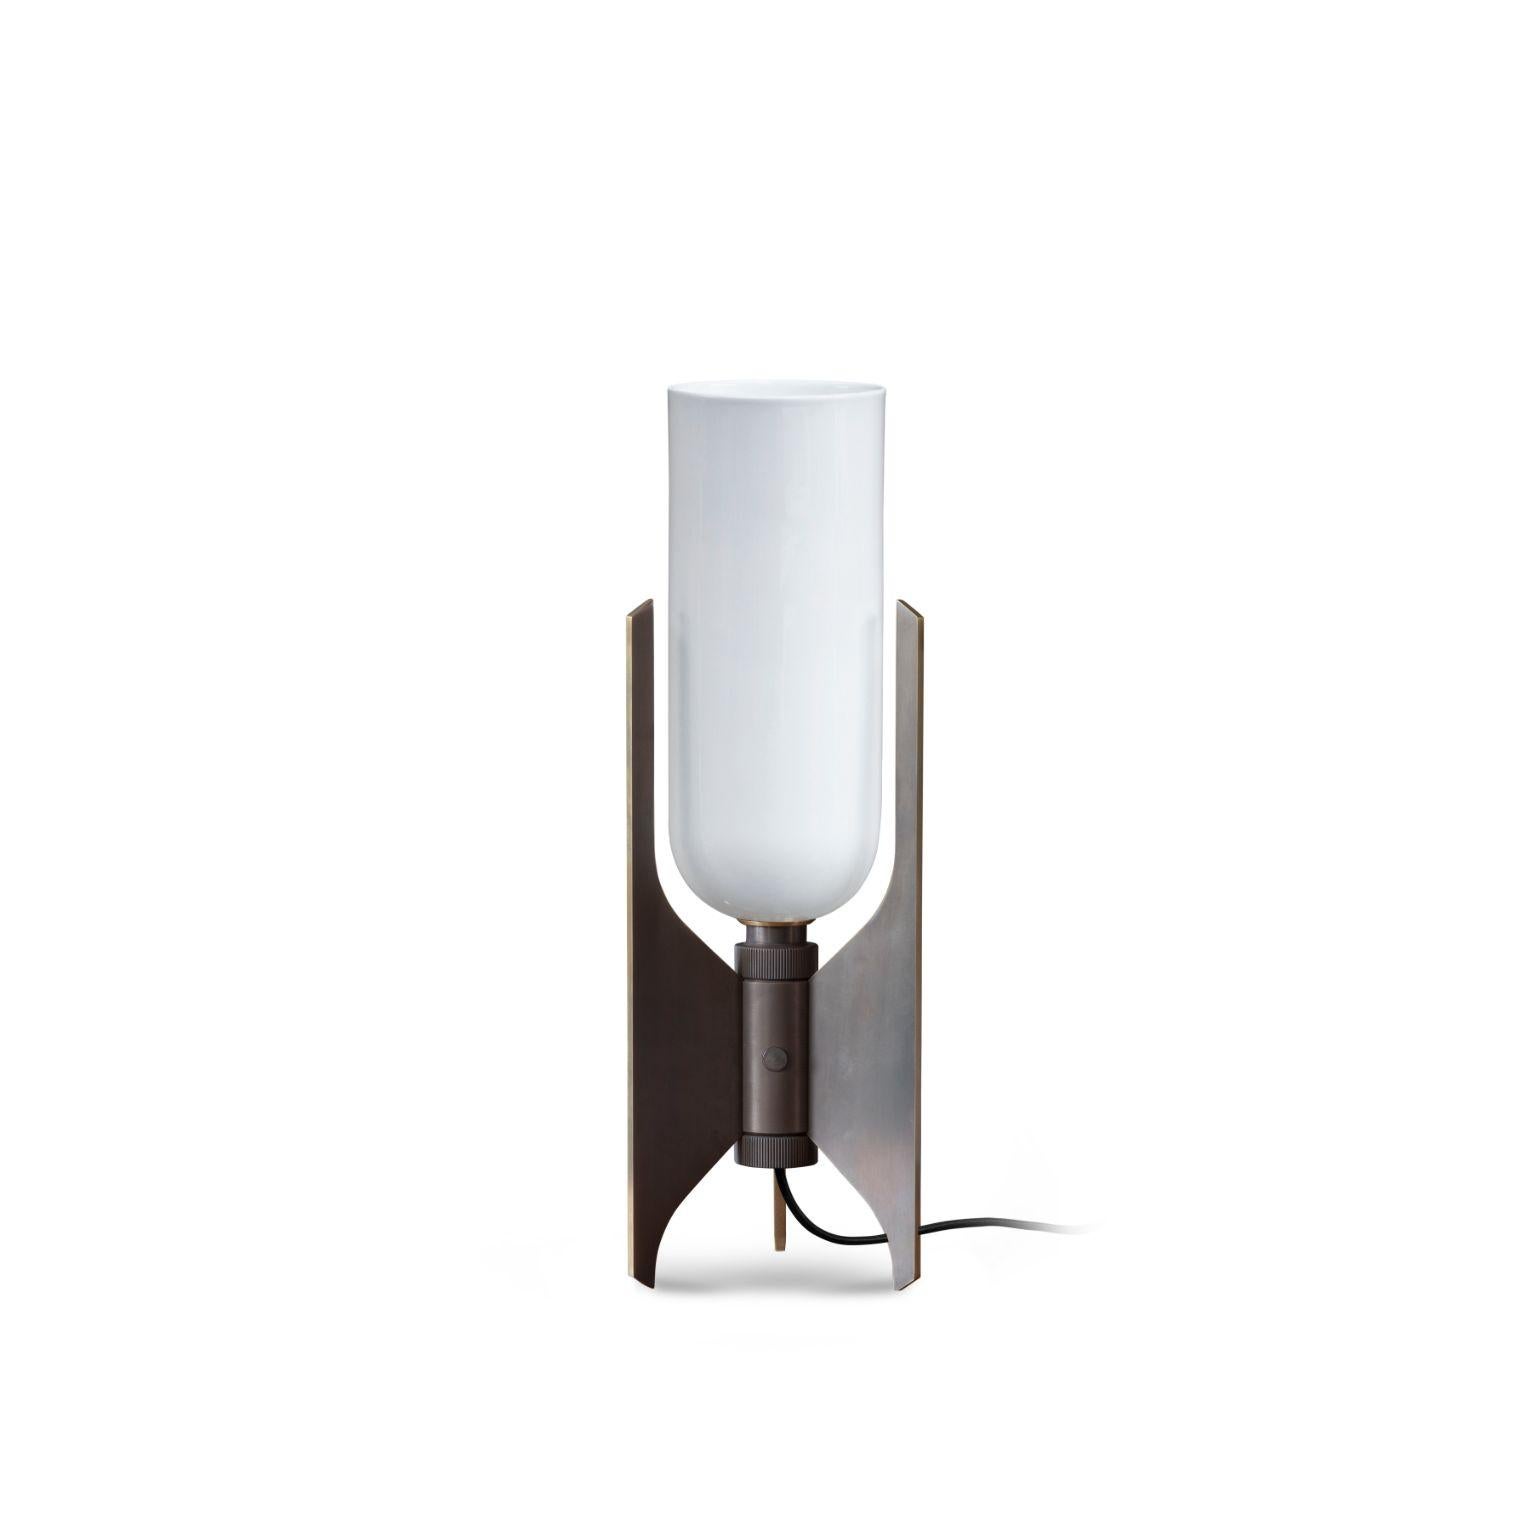 Pennon table lamp - Bronze by Bert Frank
Dimensions: 42 x 13.9 x 15.7 cm
Materials: Bronze, Bone China

When Adam Yeats and Robbie Llewellyn founded Bert Frank in 2013 it was a meeting of minds and the start of a collaborative creative partnership